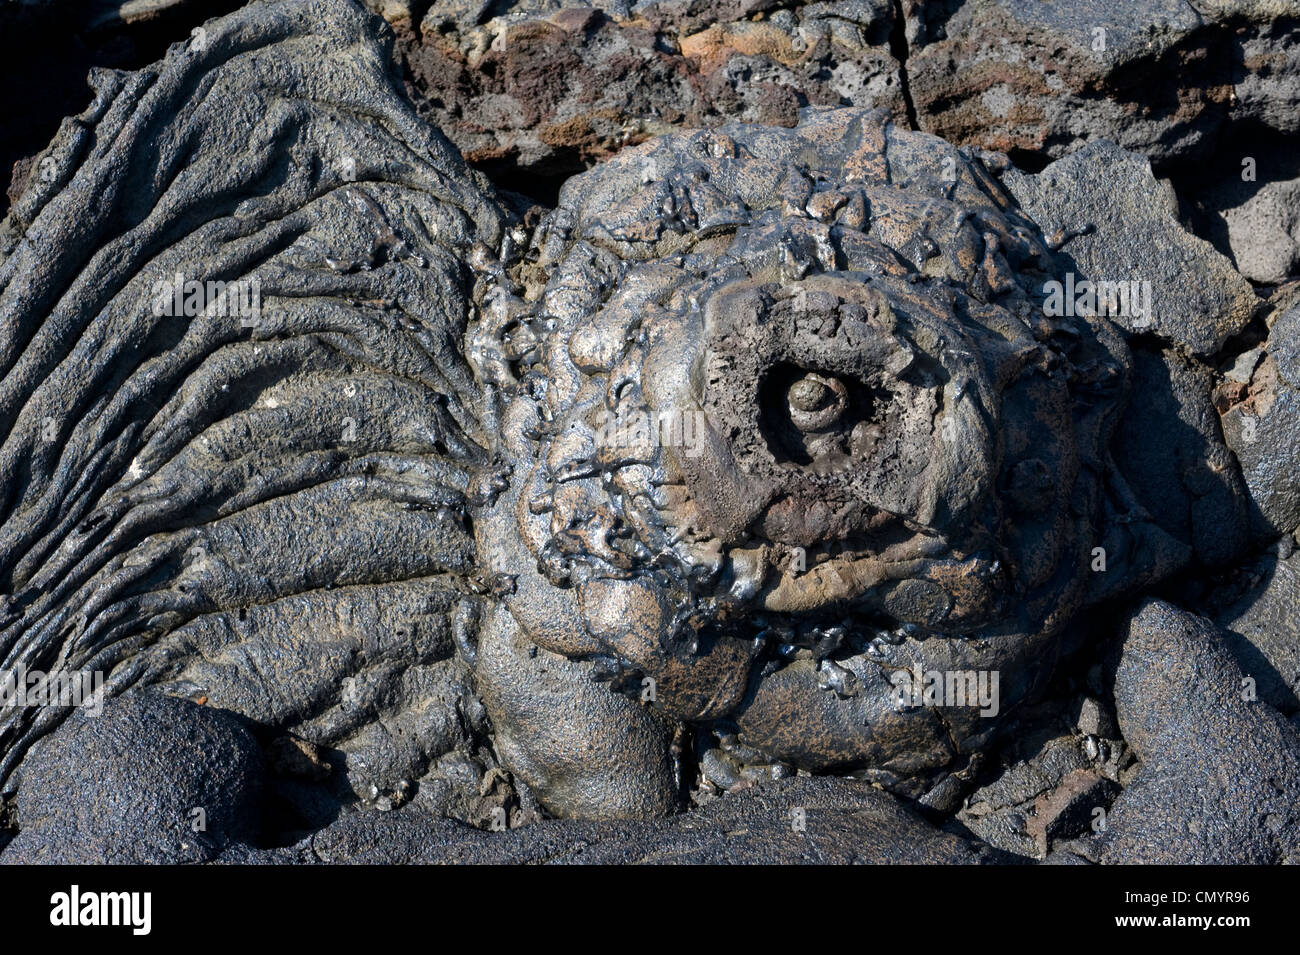 Volcanic rock formations, Galapagos Islands Stock Photo